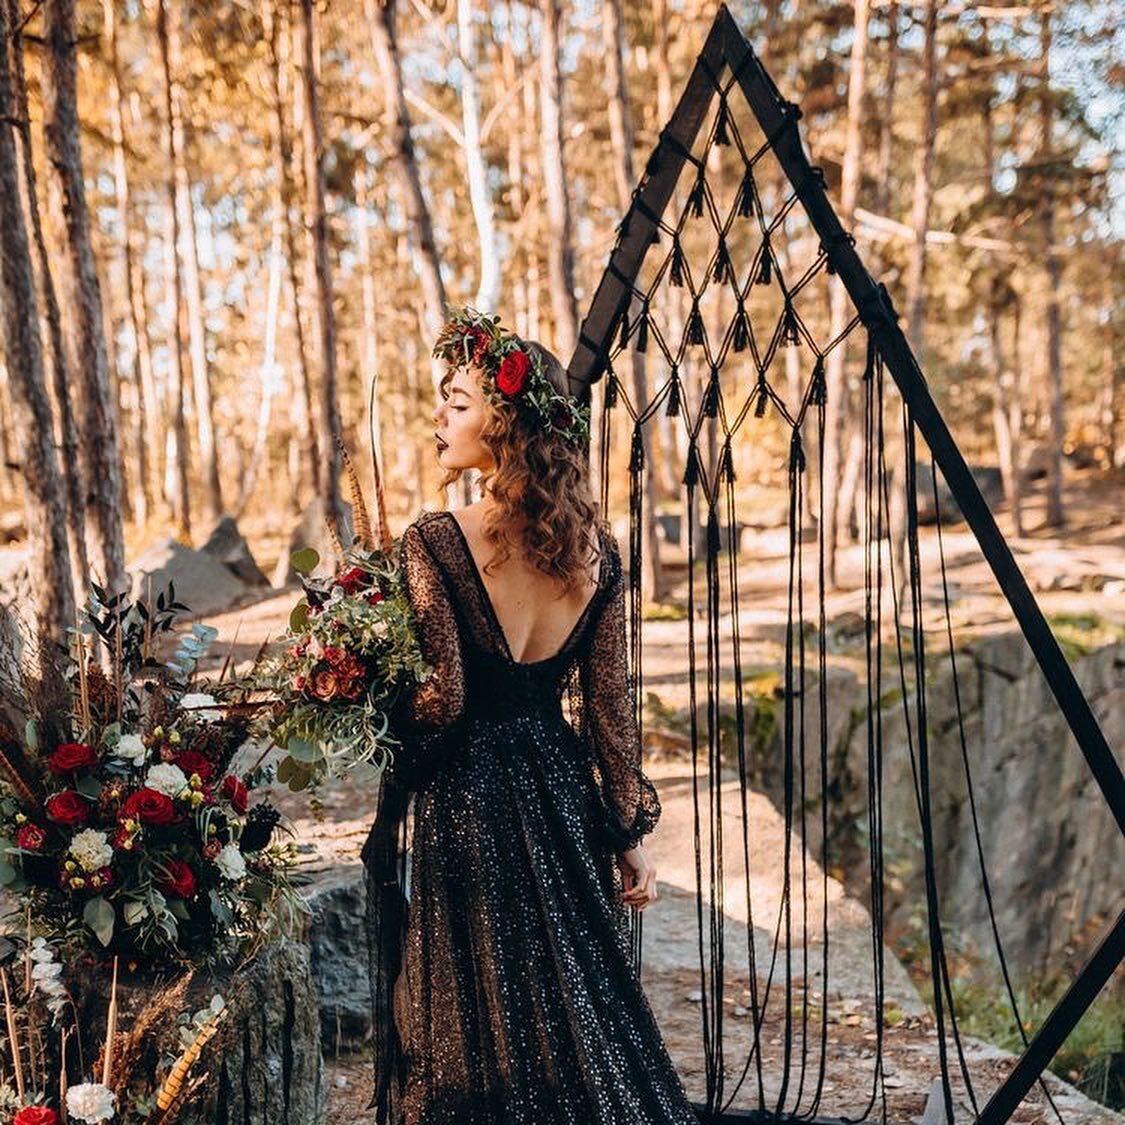 October Spooky Wedding Inspo 👻🖤

Fall weddings are my favorite! They just feel so warm &amp; cozy - without the hot sun being involved! Say goodbye to sweat &amp; hello to comfort 🖤

Fall Favorites:
Pumpkin Soup 
Grilled Cheese &amp; Tomato Soup 
